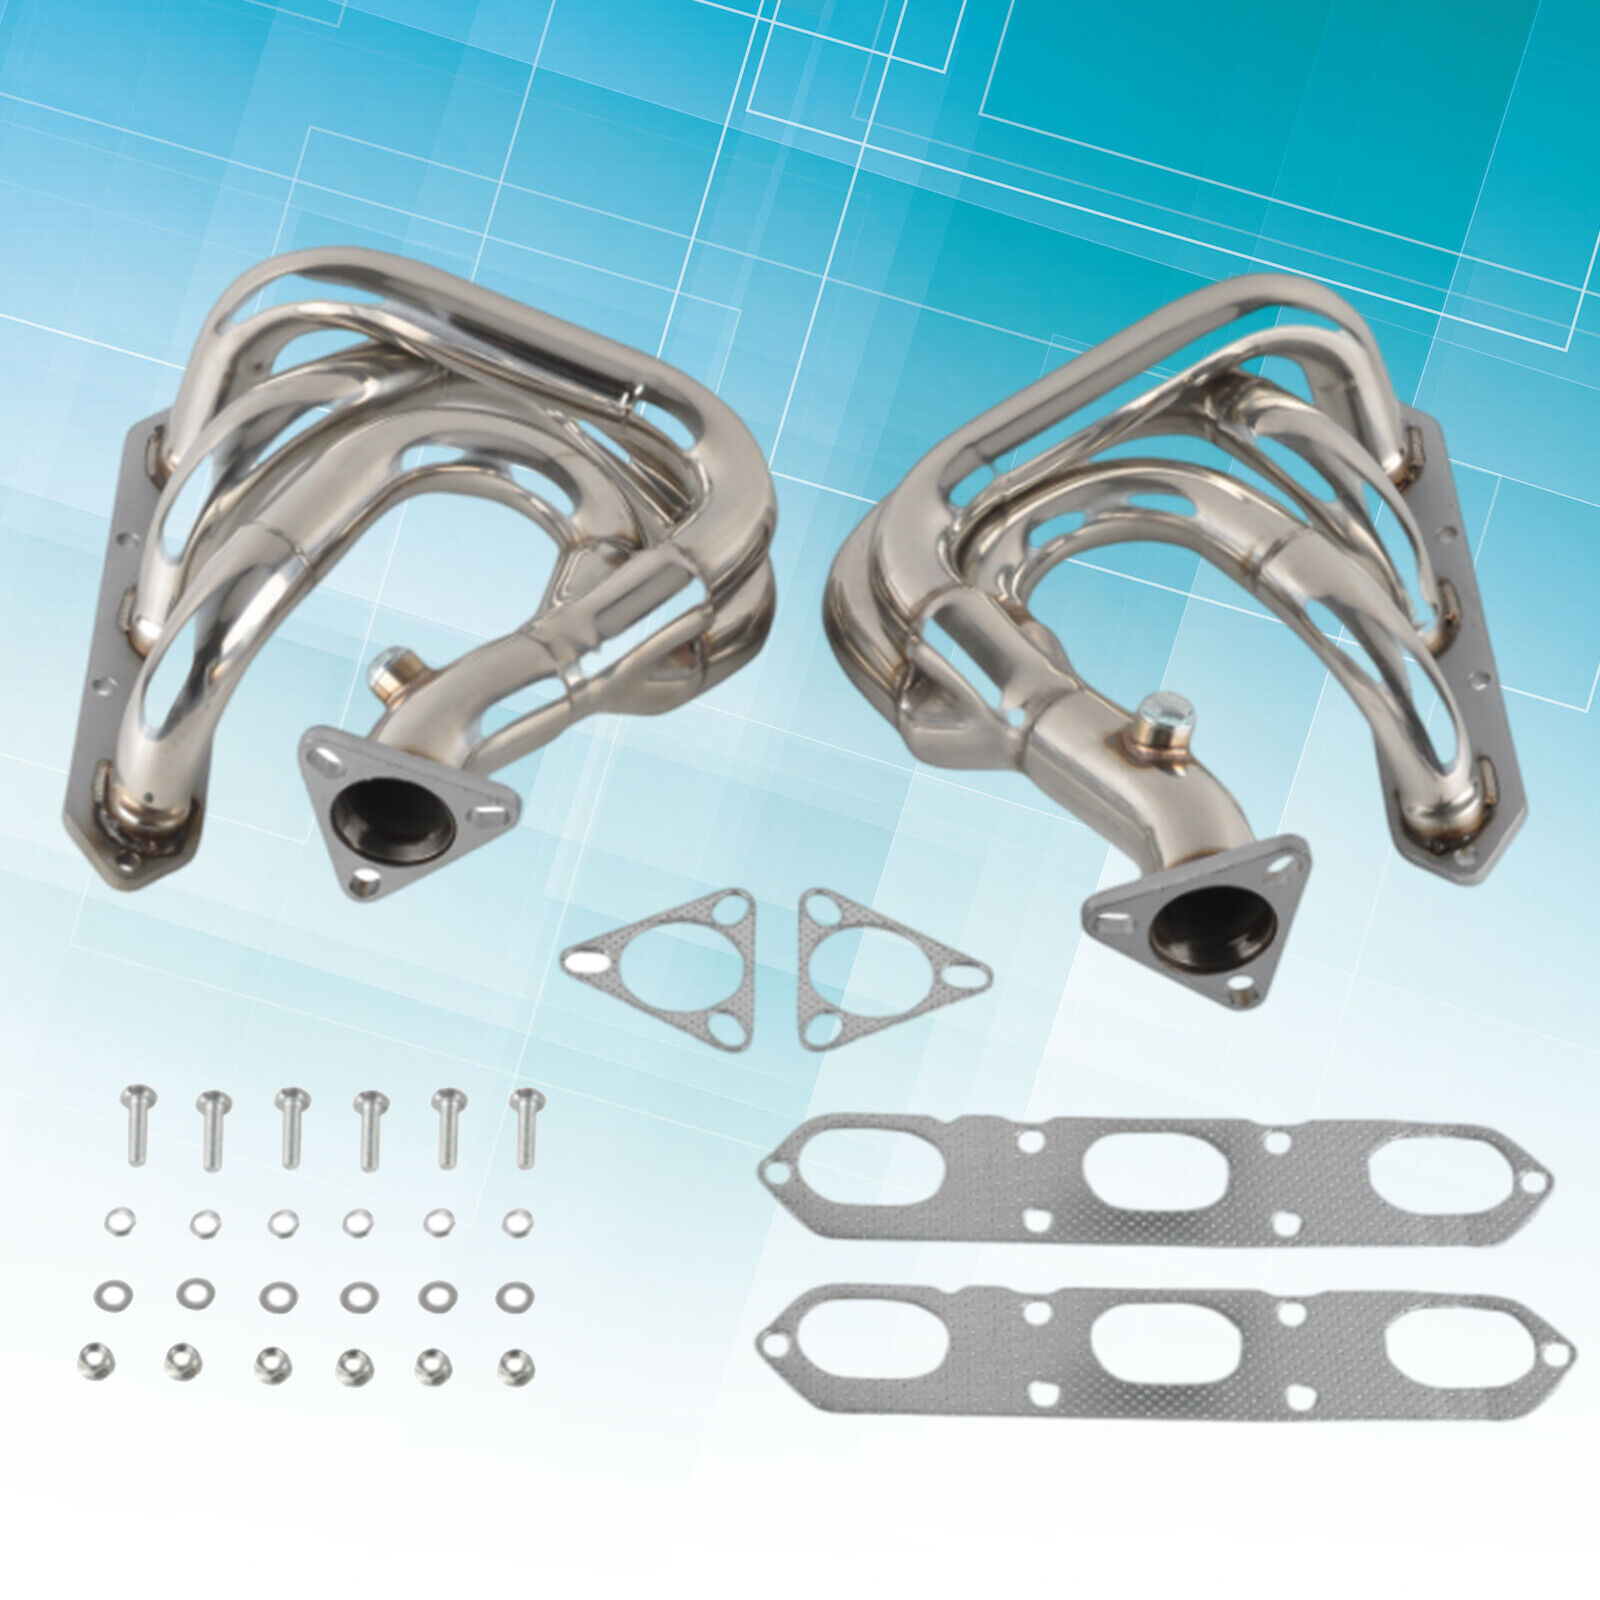 SS Stainless Steel Headers Fits Porsche Boxster 986 1997-2004 2.5L 2.7L 3.2LY0